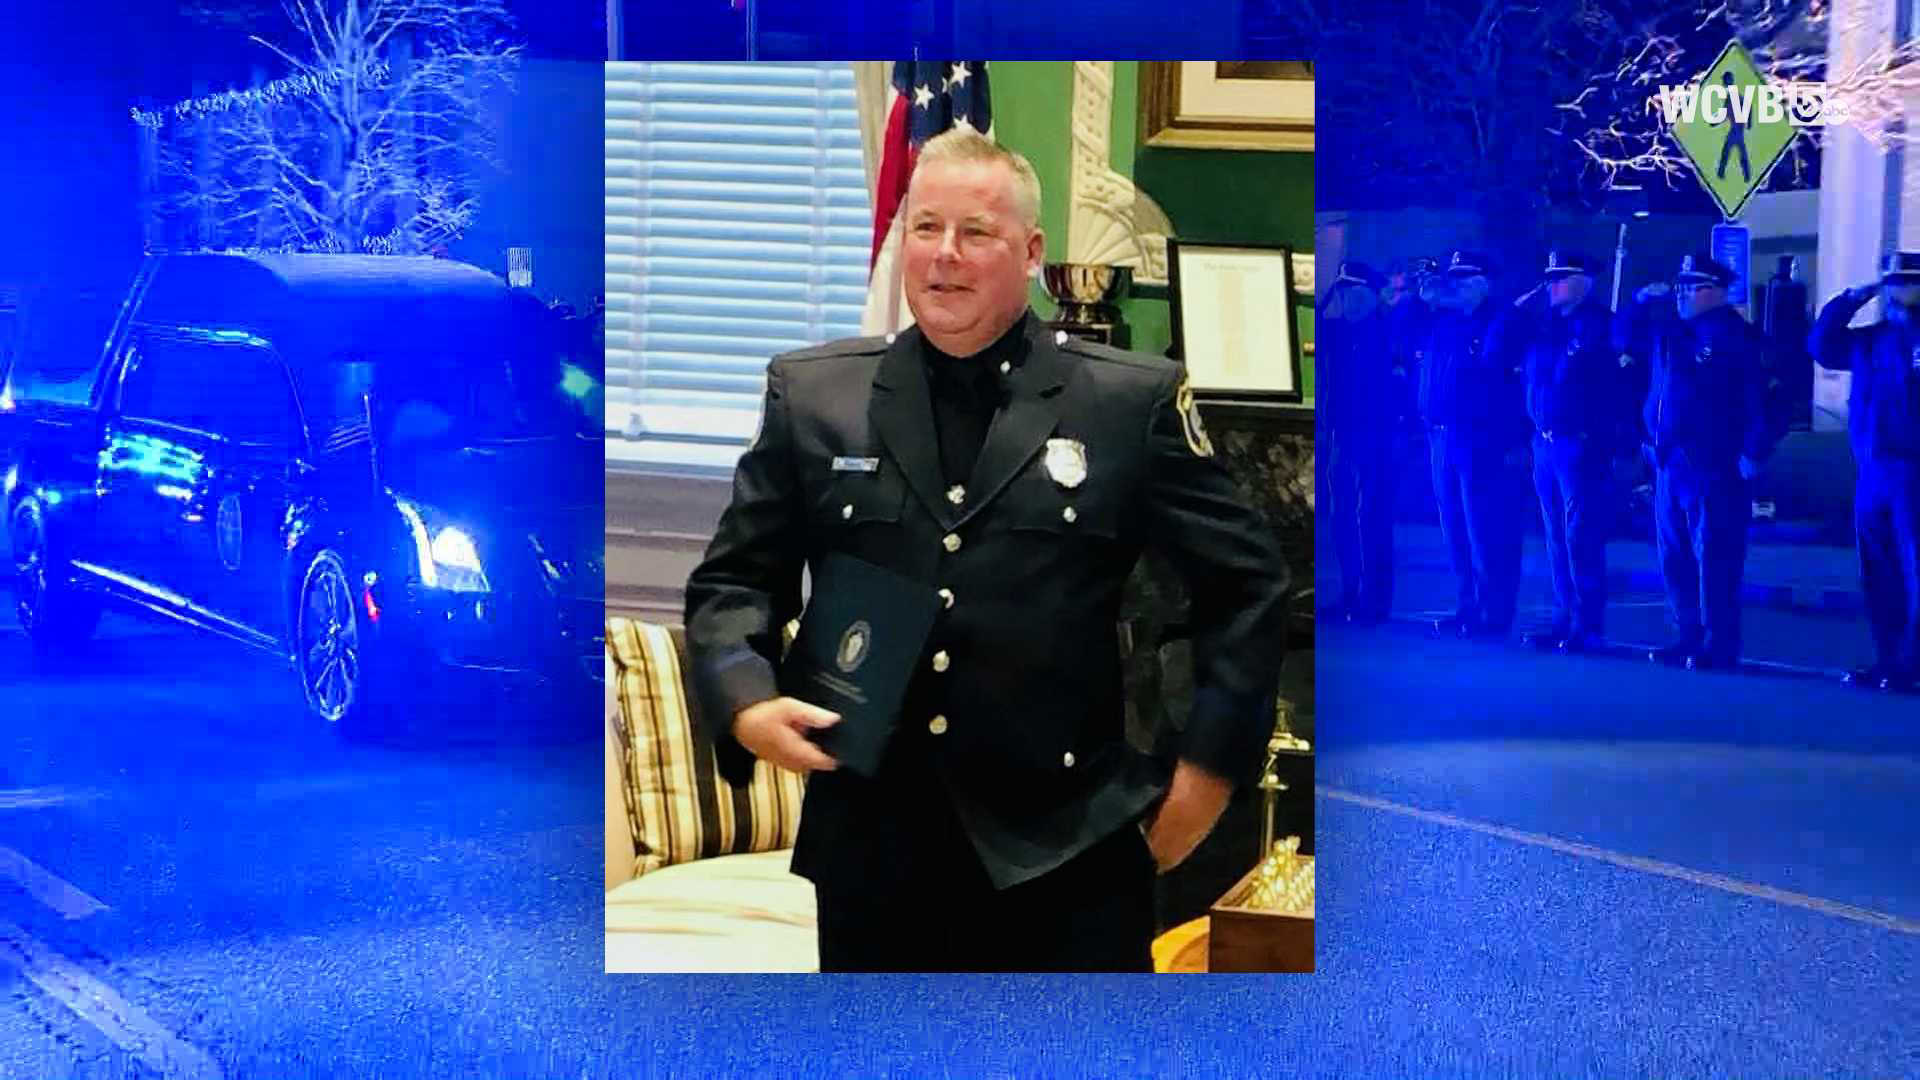 Procession Held For Fallen Waltham Police Officer 